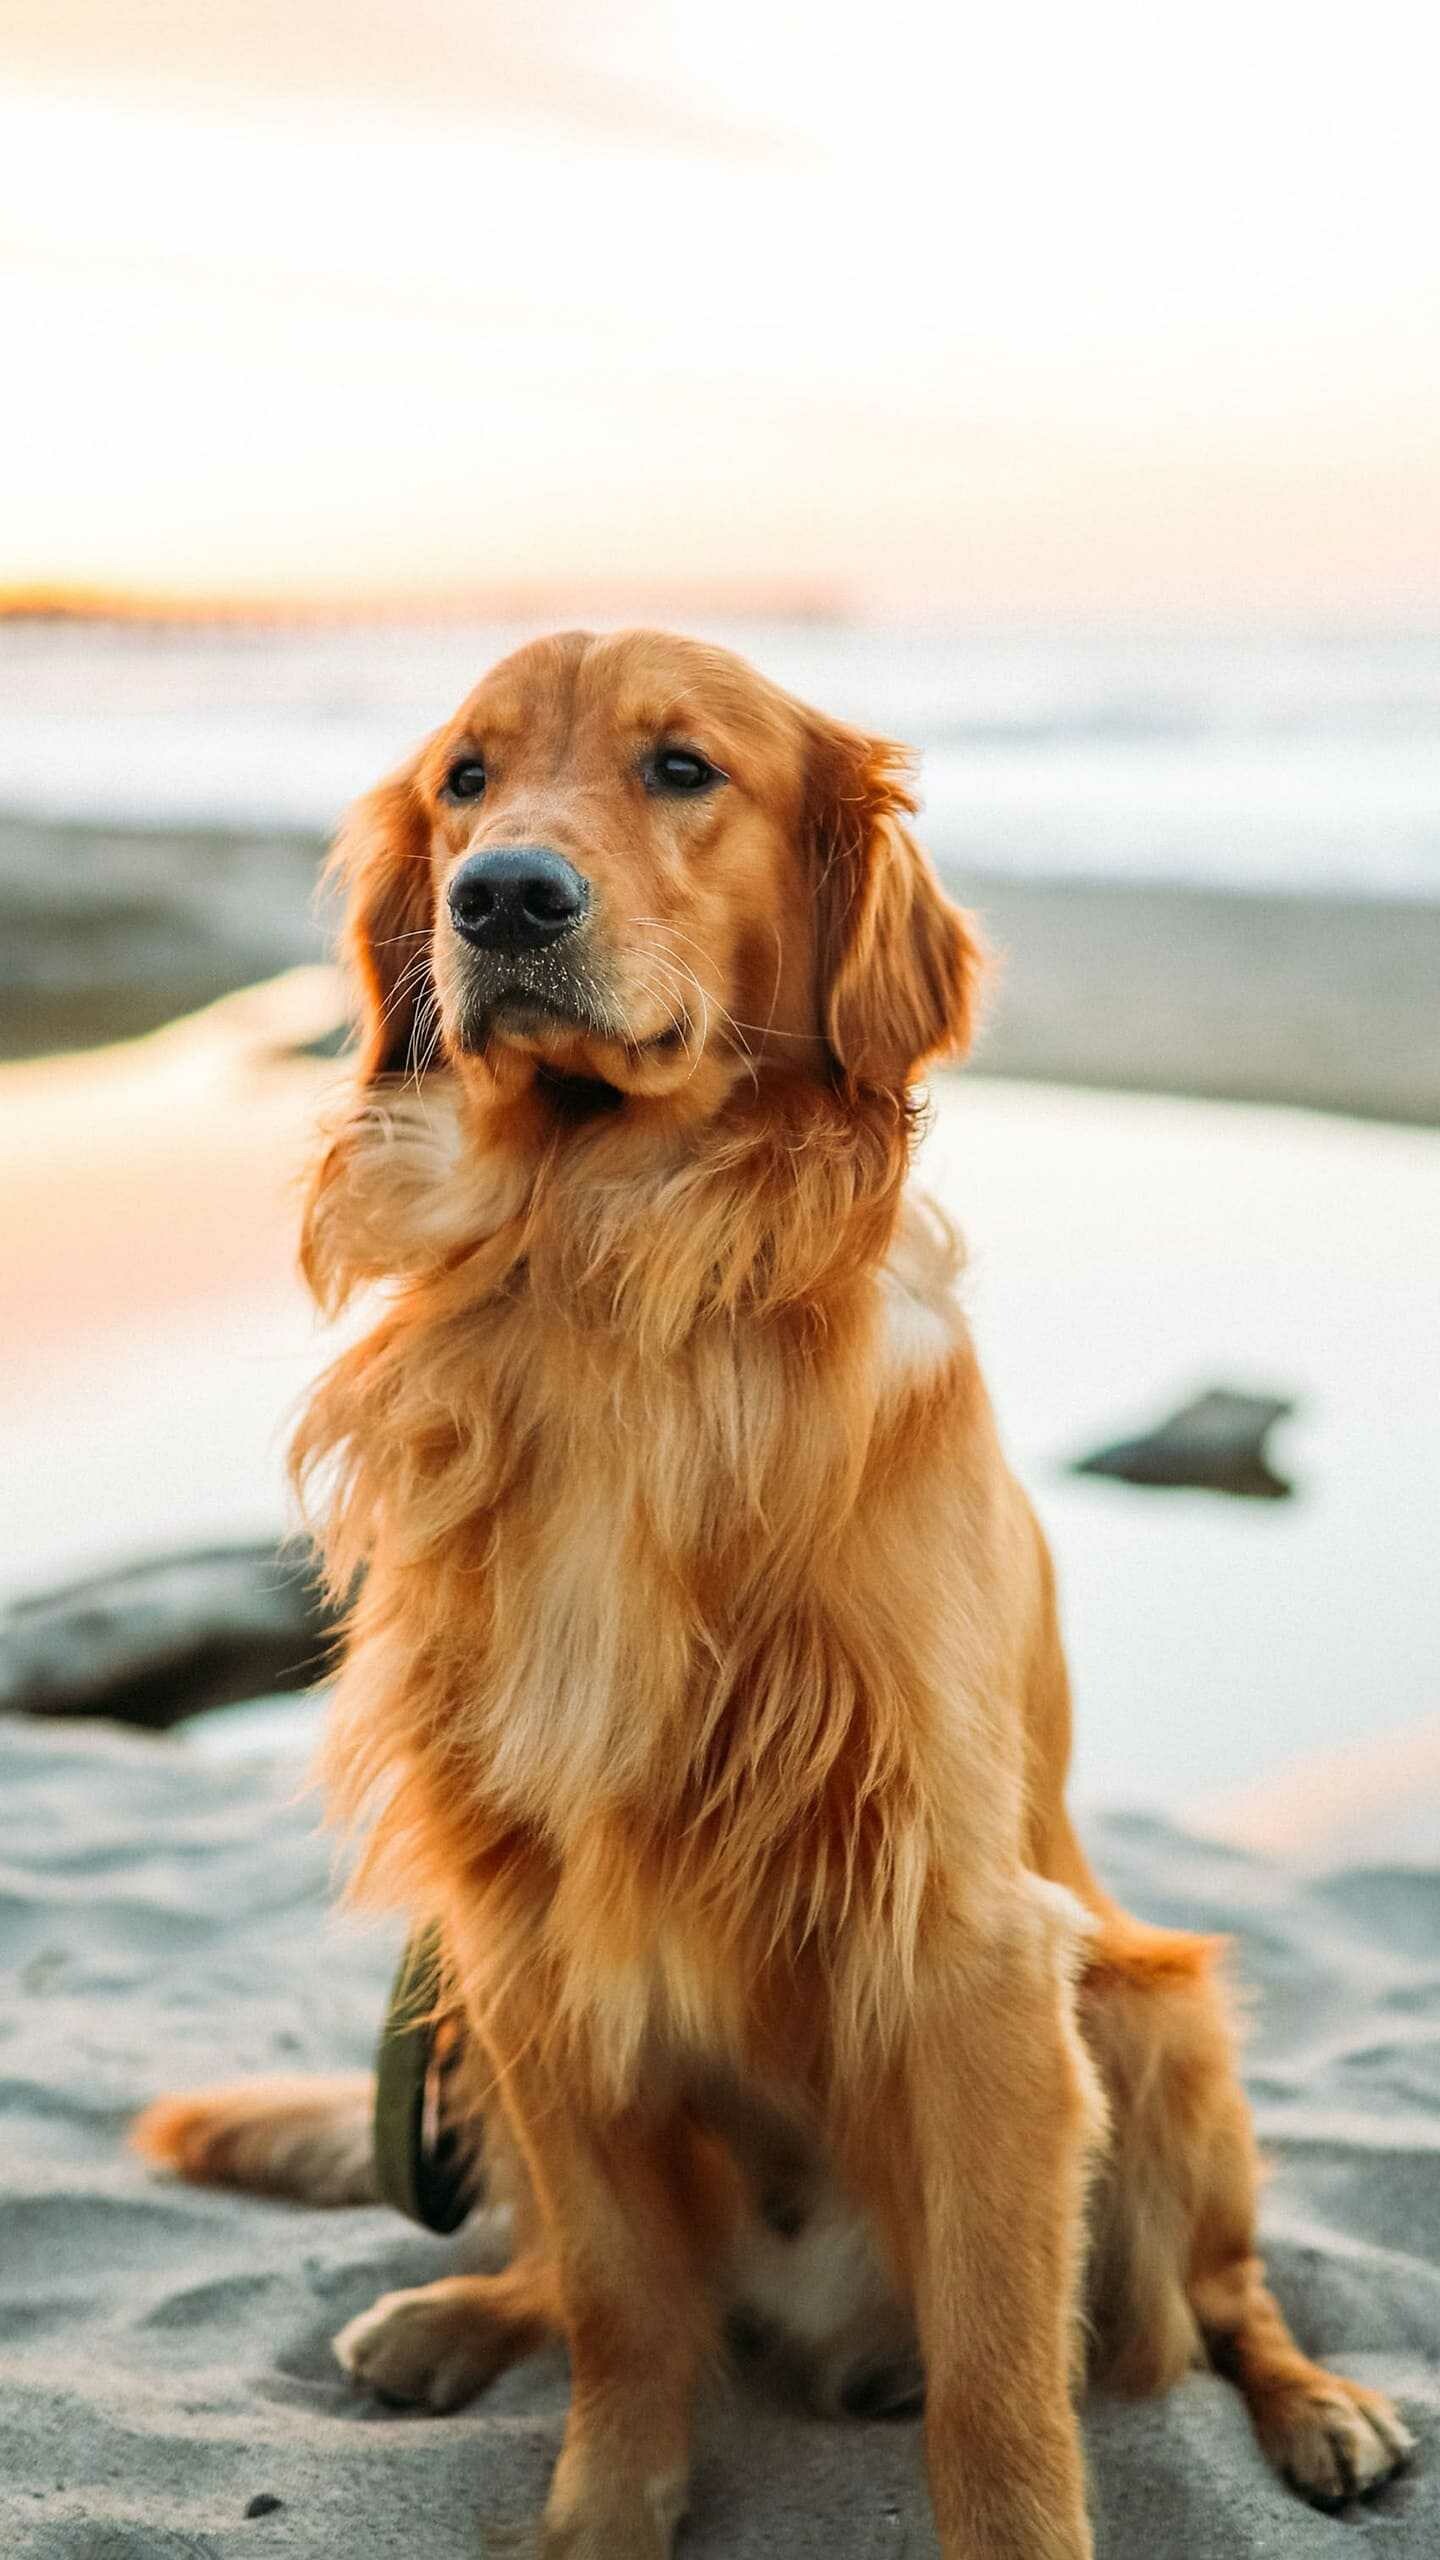 Golden Retriever: The double coat is a recognizable and striking feature: the outer coat is long, flat, or wavy and has good feathering on the forelegs, while the undercoat is dense and provides weather resistance, Companion dog. 1440x2560 HD Wallpaper.